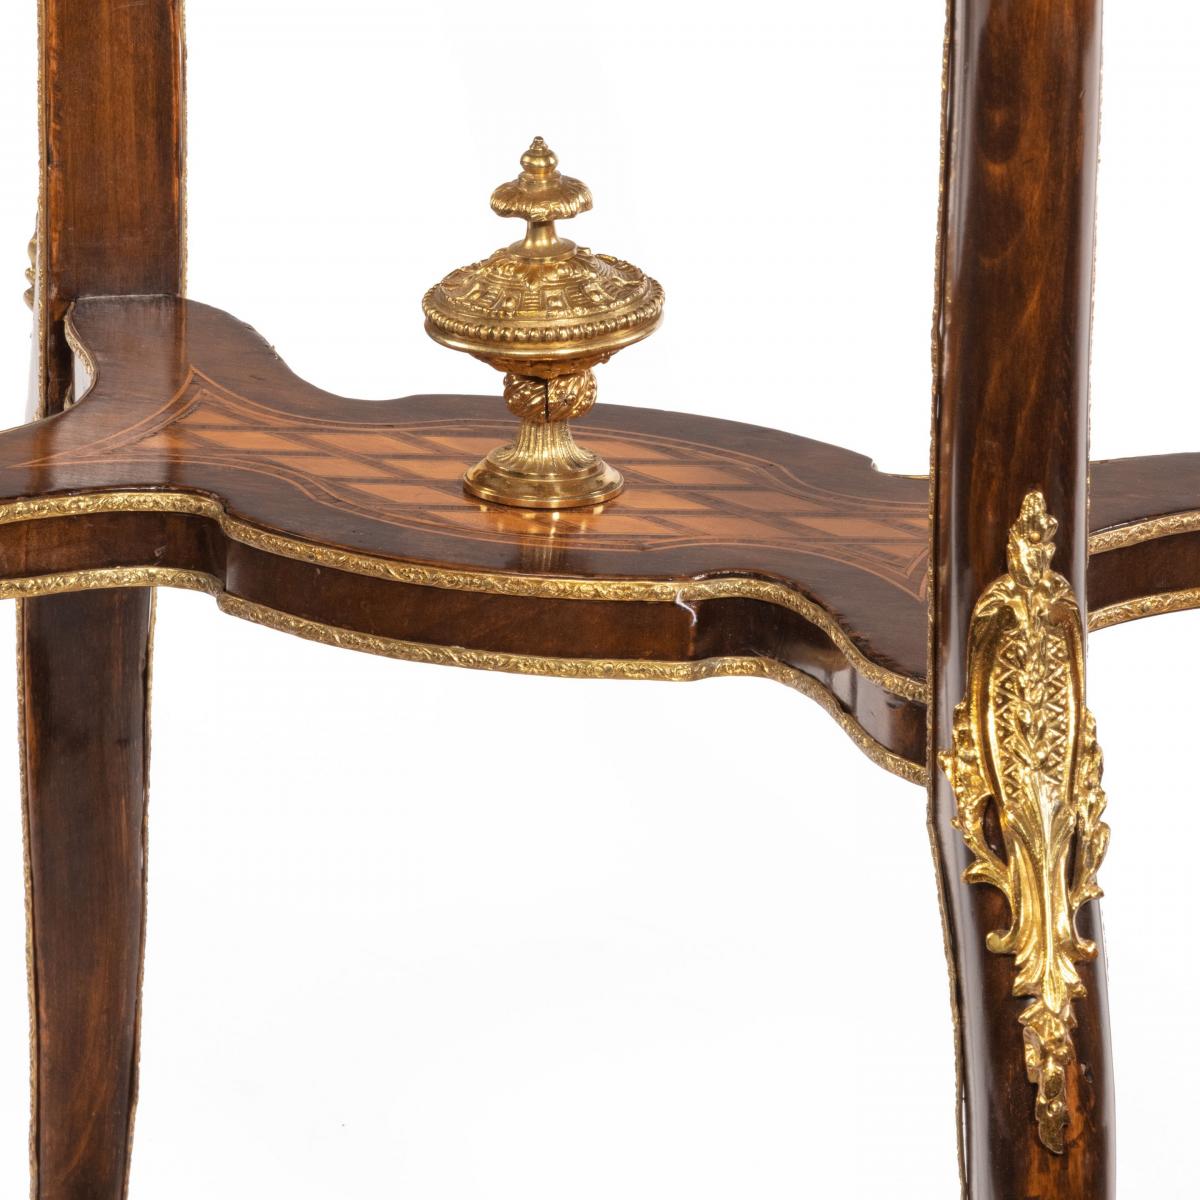 Napoleon III parquetry jardinière by Roll